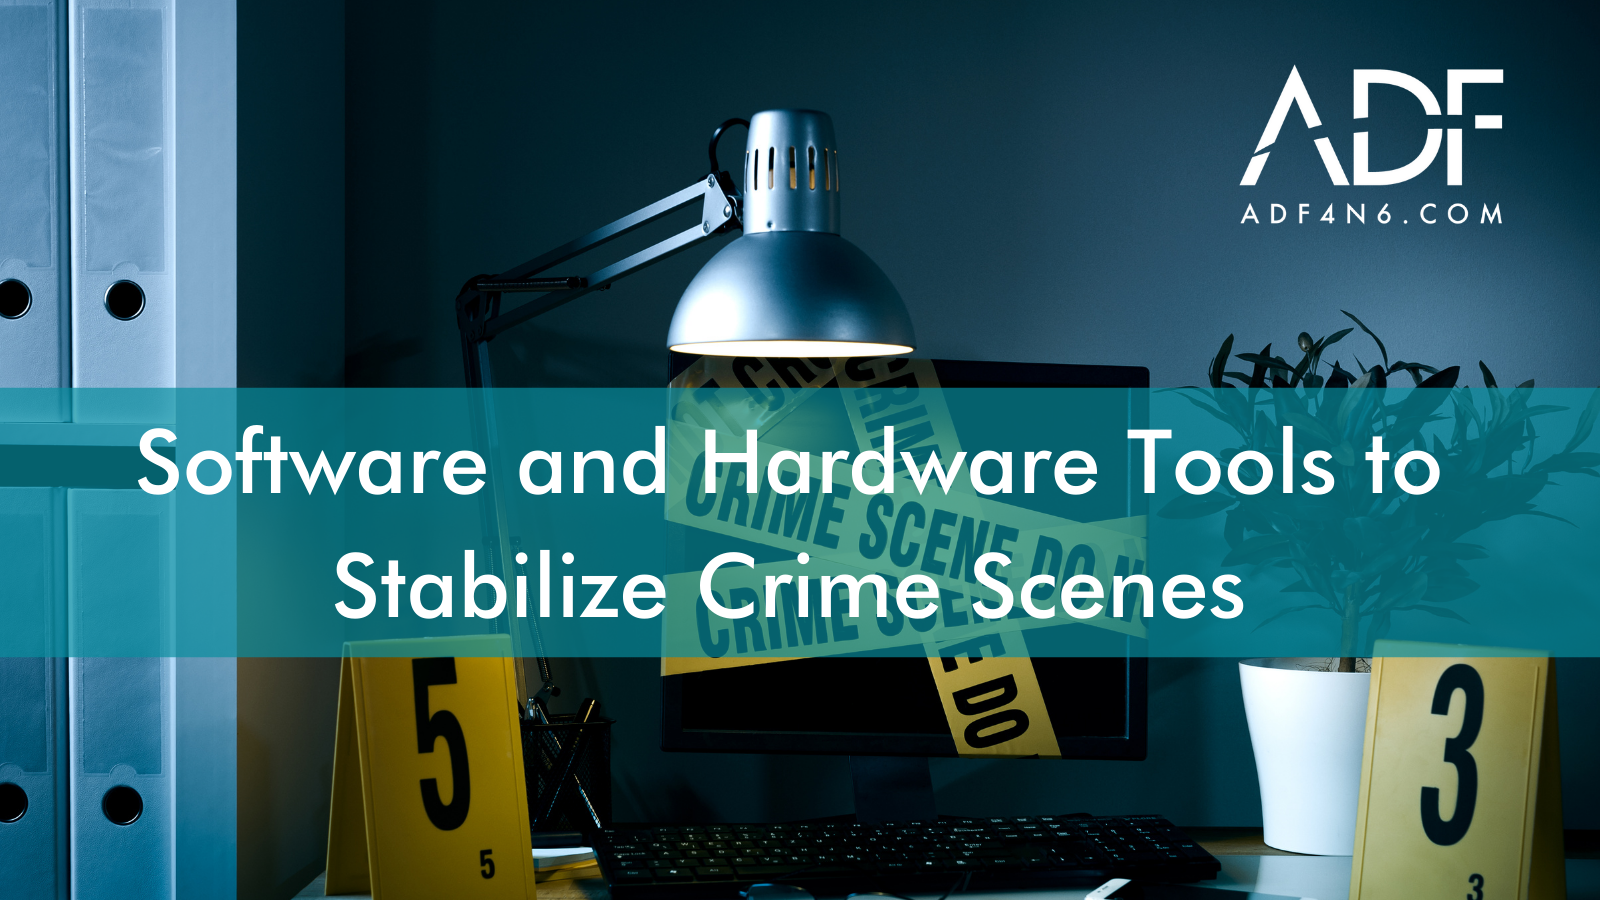 Software and Hardware Tools to Stabilize Crime Scenes